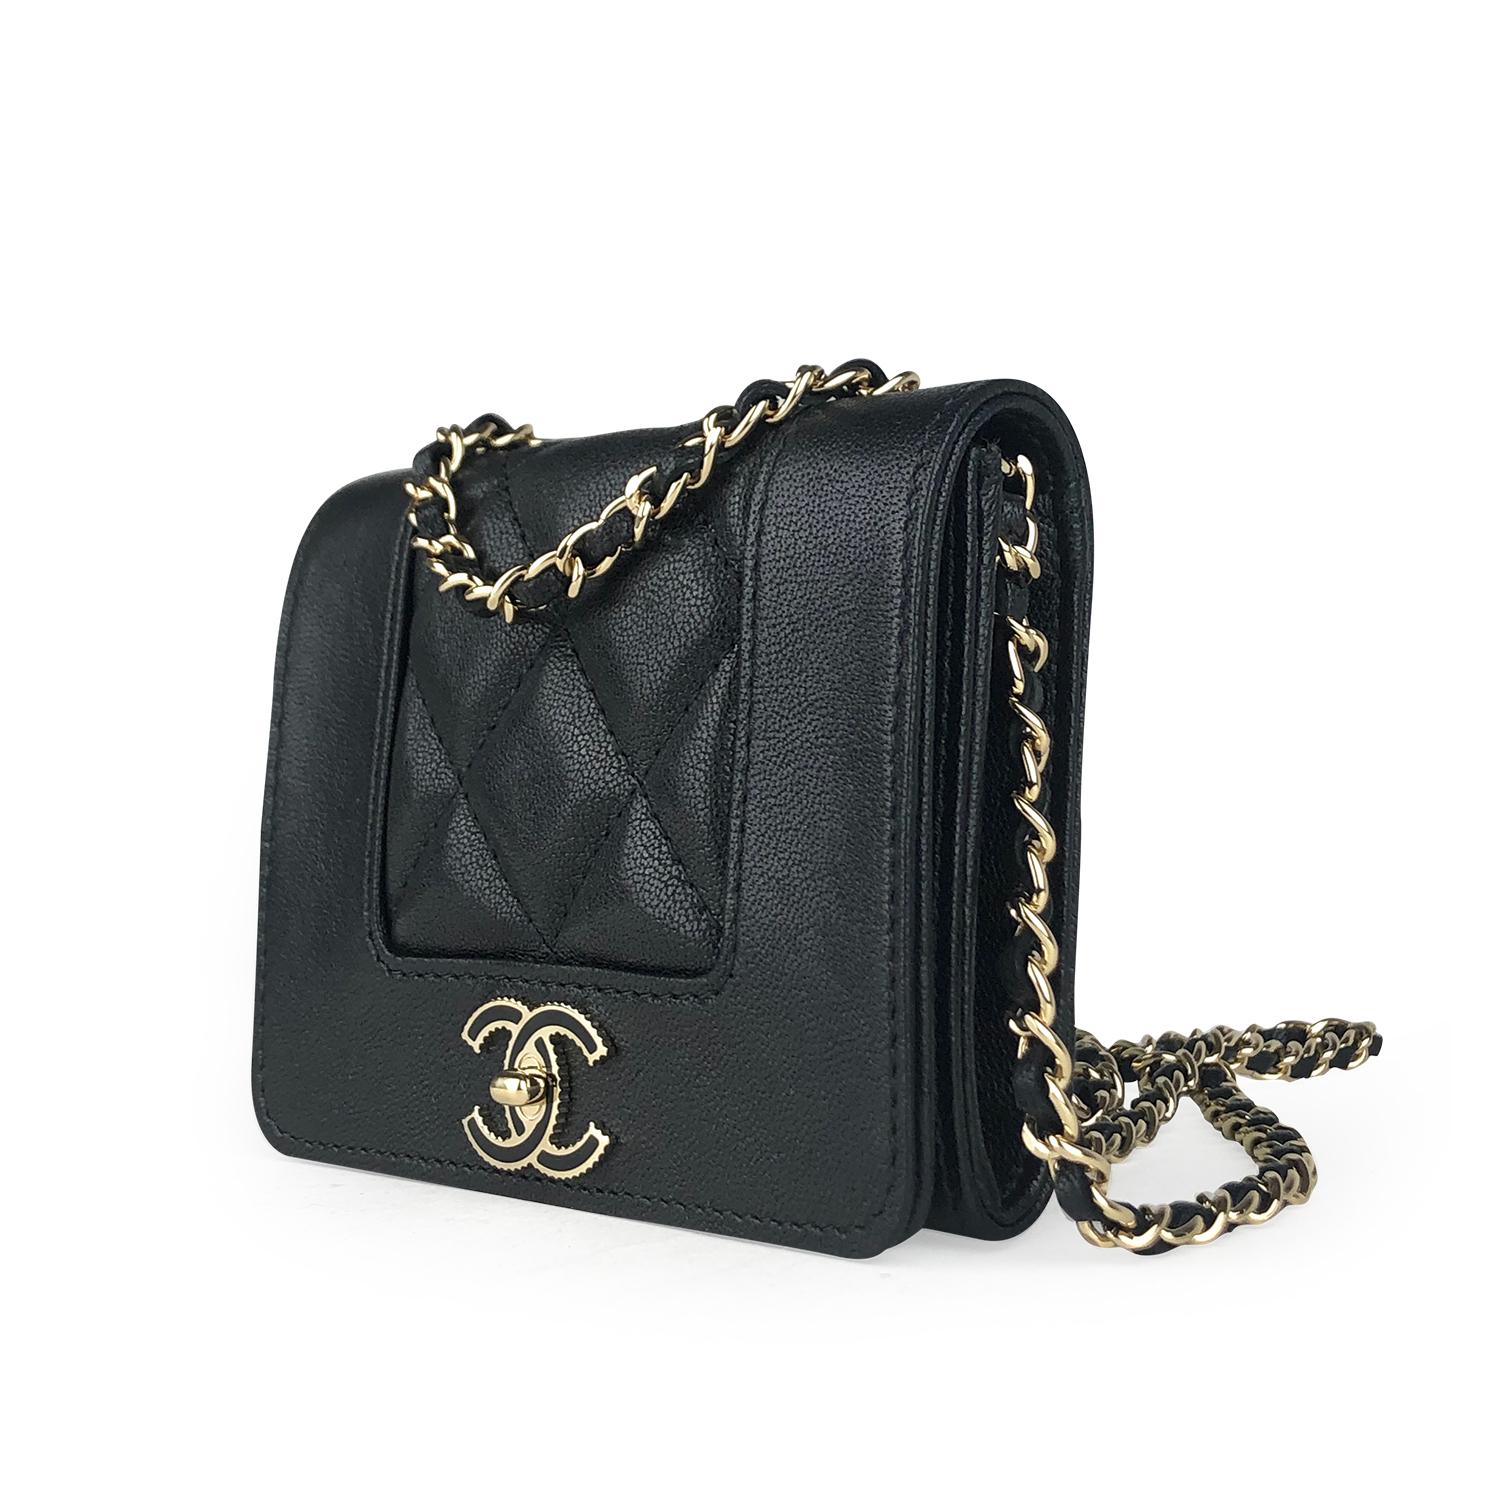 Black quilted lambskin Chanel Mademoiselle Wallet on Chain with

- Gold-tone hardware
- Single chain-link and leather shoulder strap
- CC logo adornment at front
- Black interior, 3 interior pockets pockets and snap closure at front flap

Overall